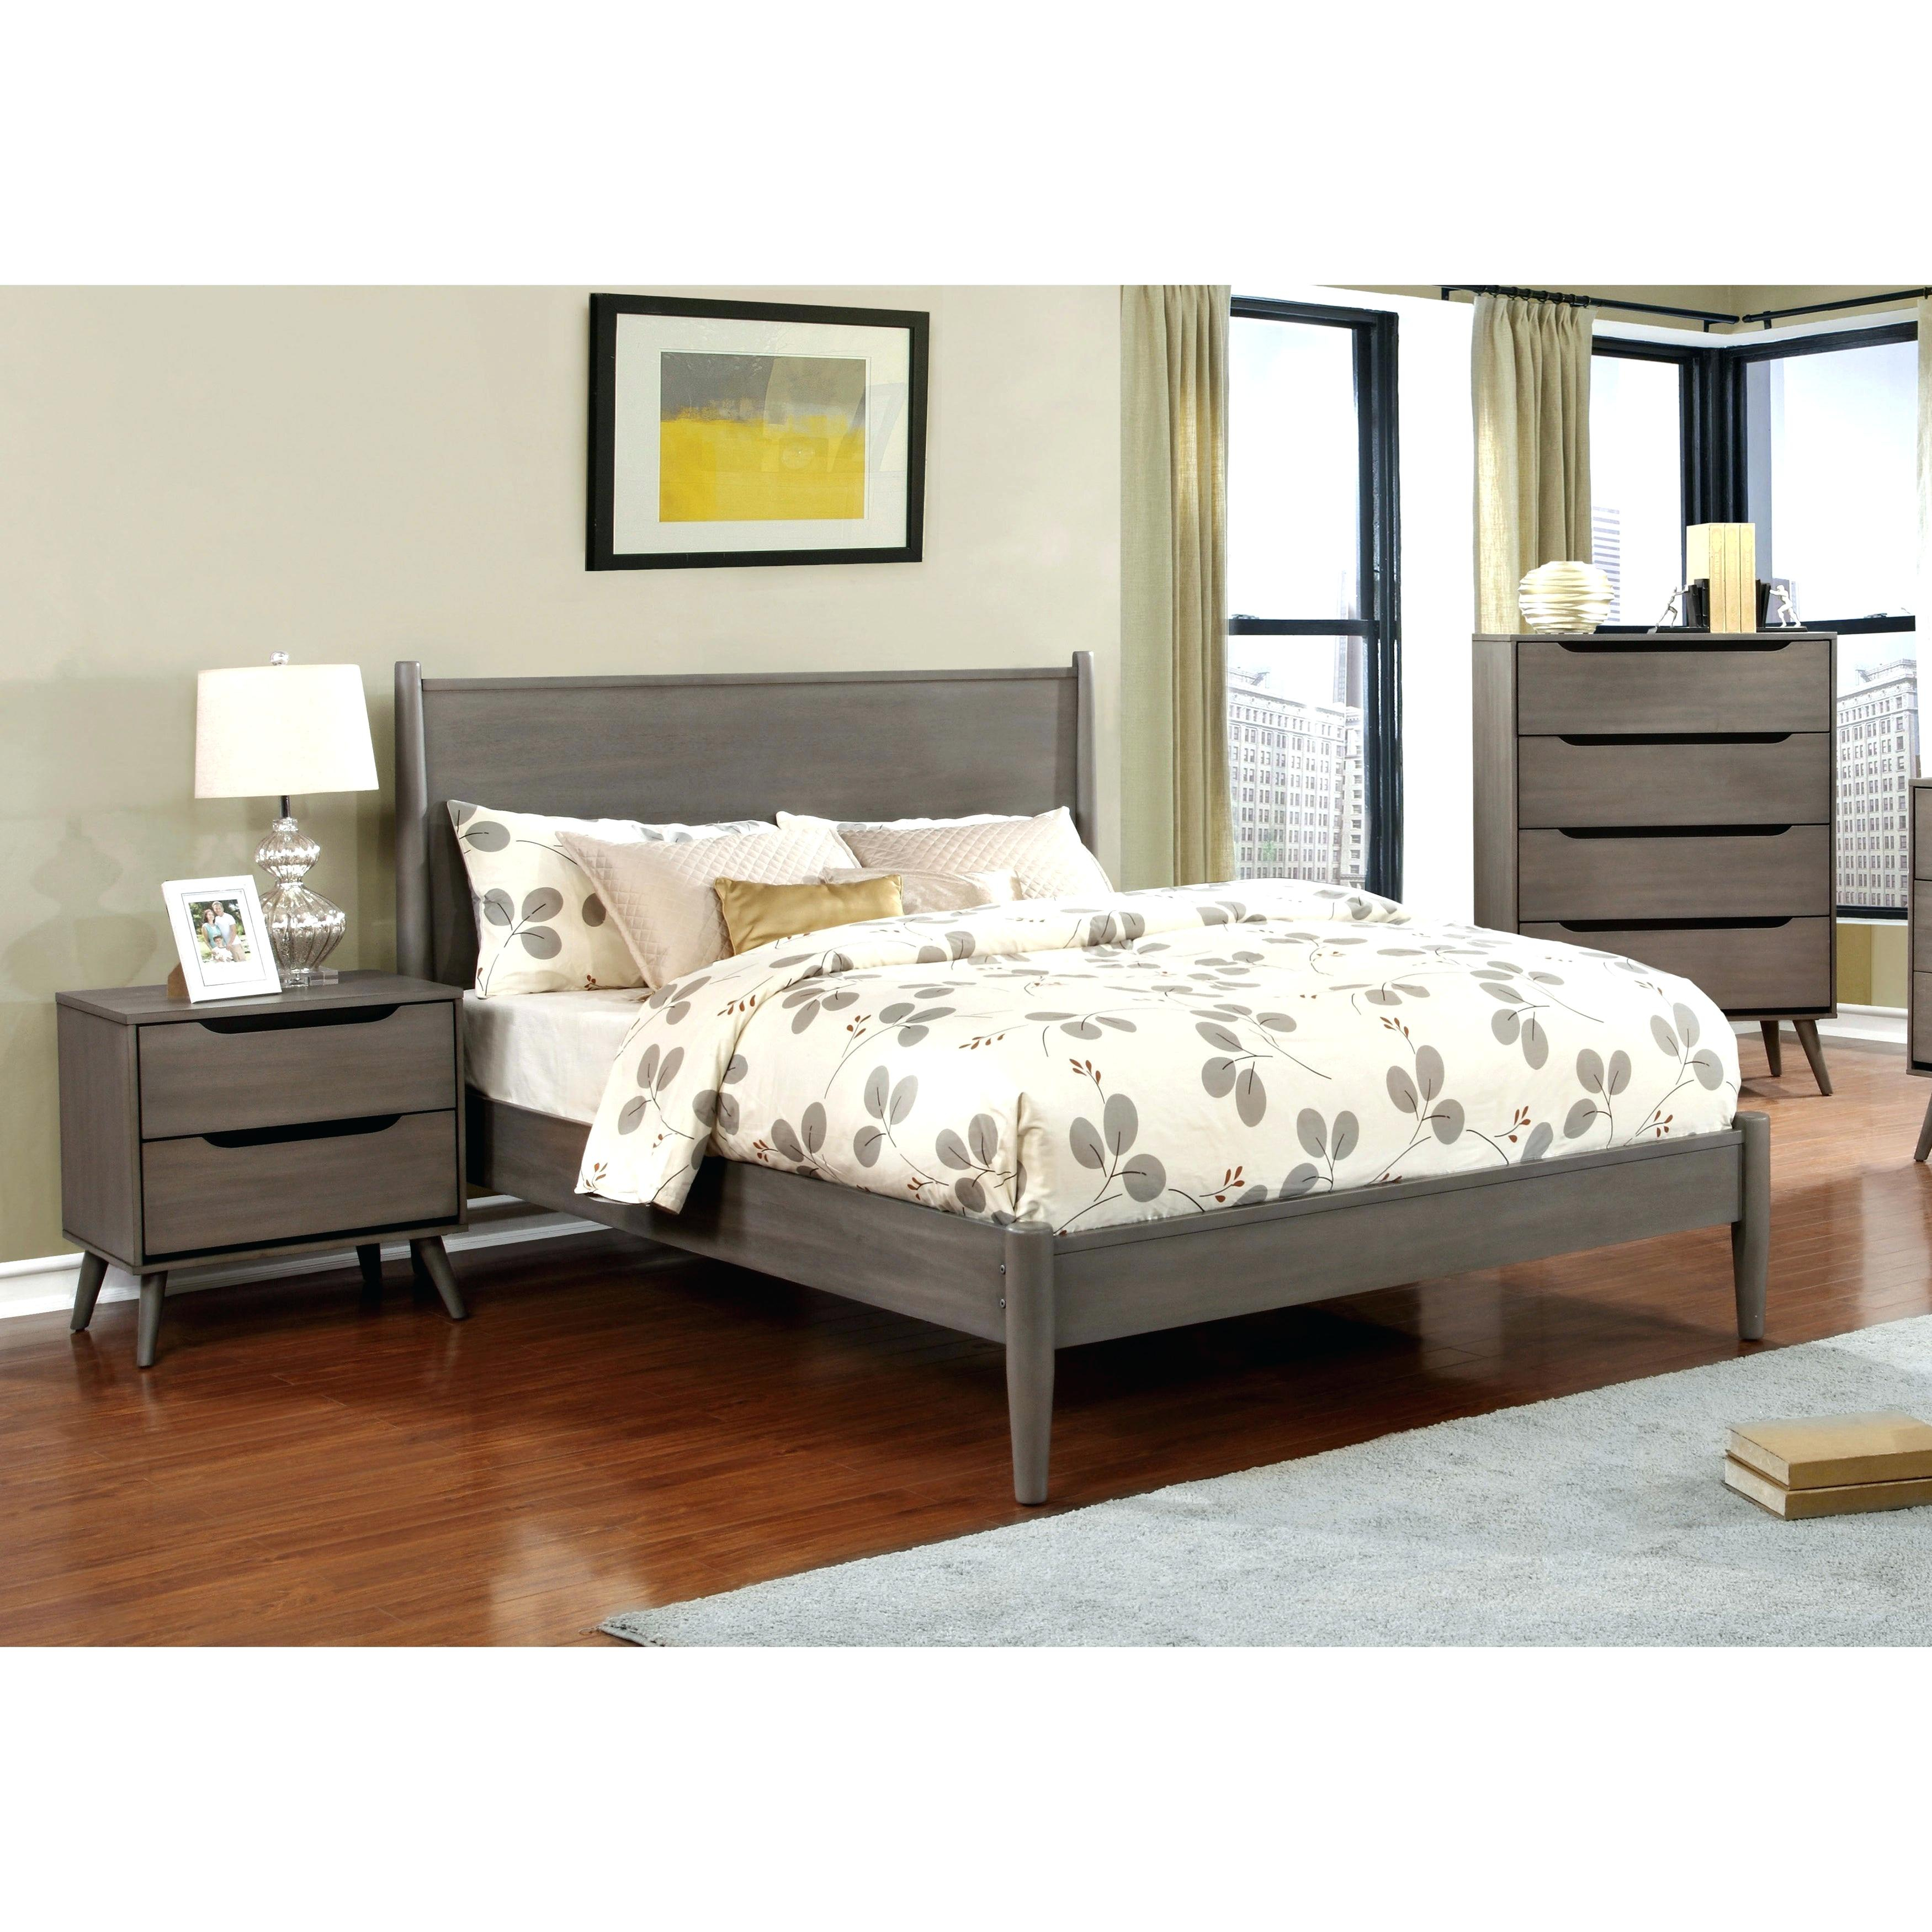 Ashfield 5 Piece Cal King Storage Bedroom Set Queen 6 Furniture pertaining to measurements 3500 X 3500